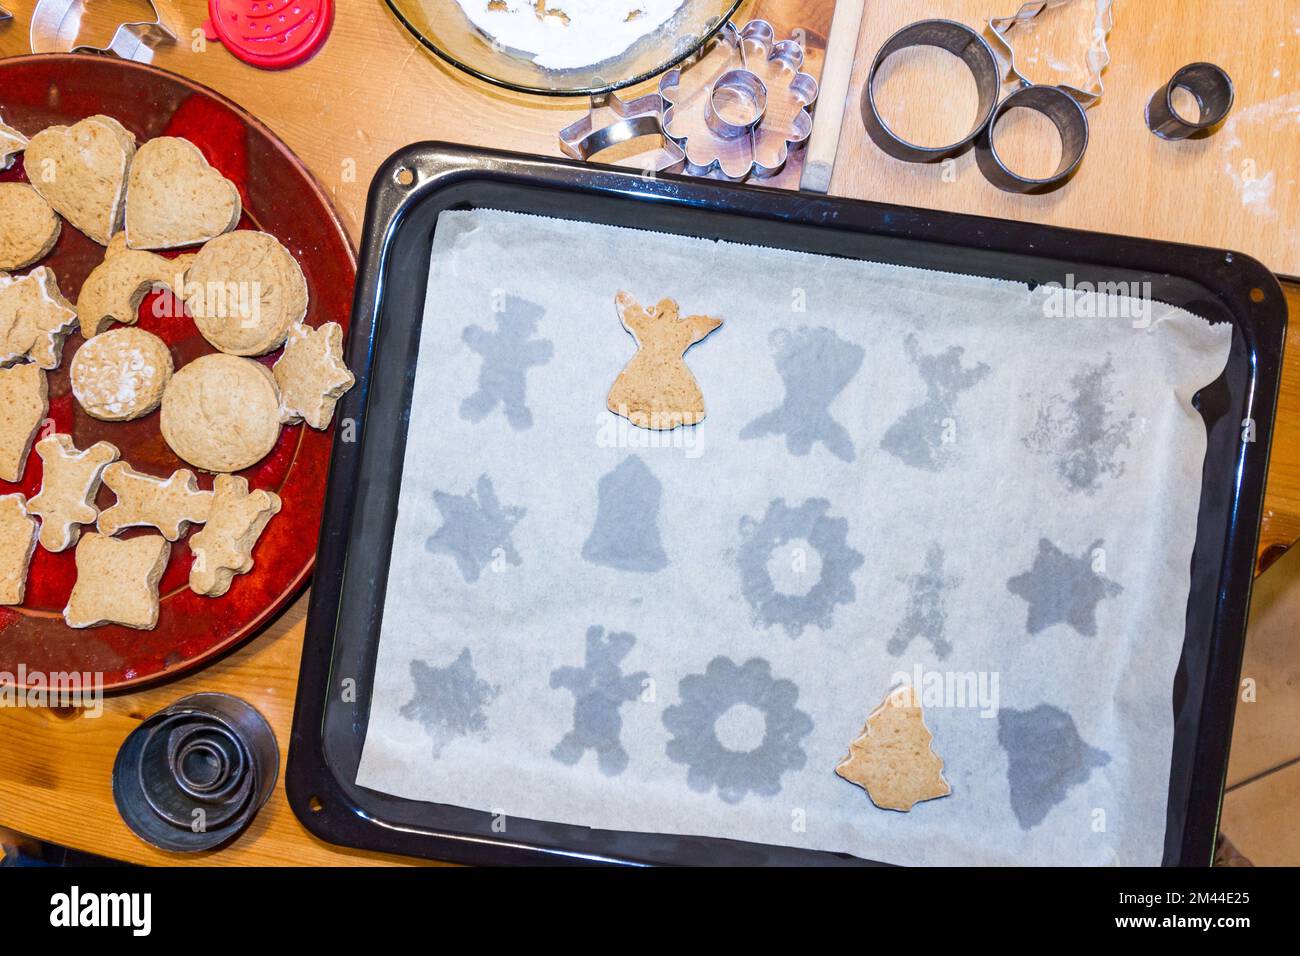 Christmas gingerbread figures baked on baking sheet. Two remained, the rest removed. Stock Photo